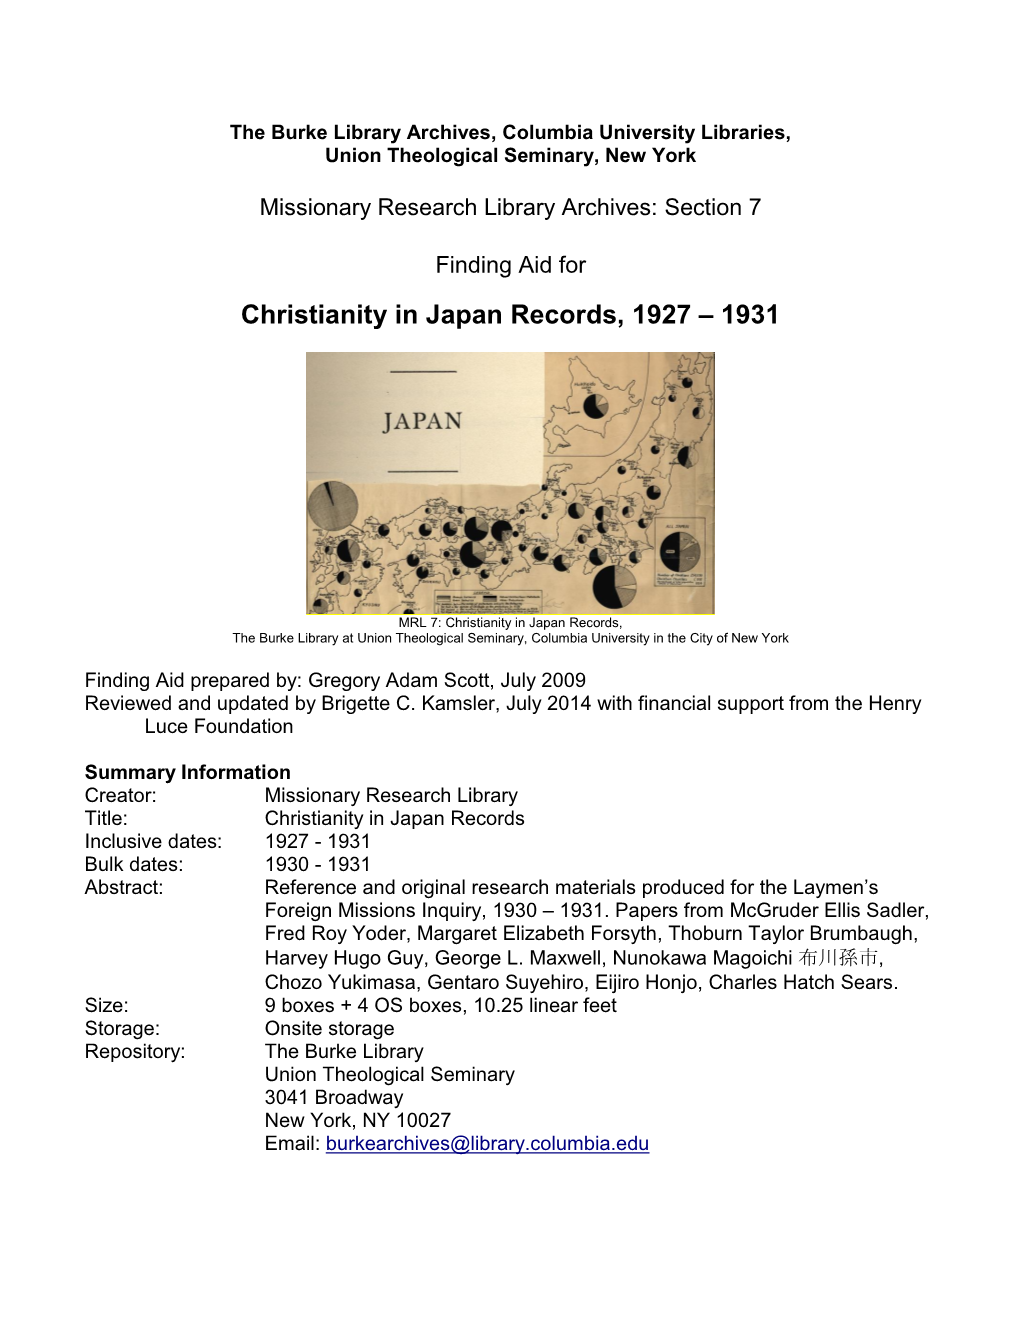 Christianity in Japan Records, 1927 – 1931